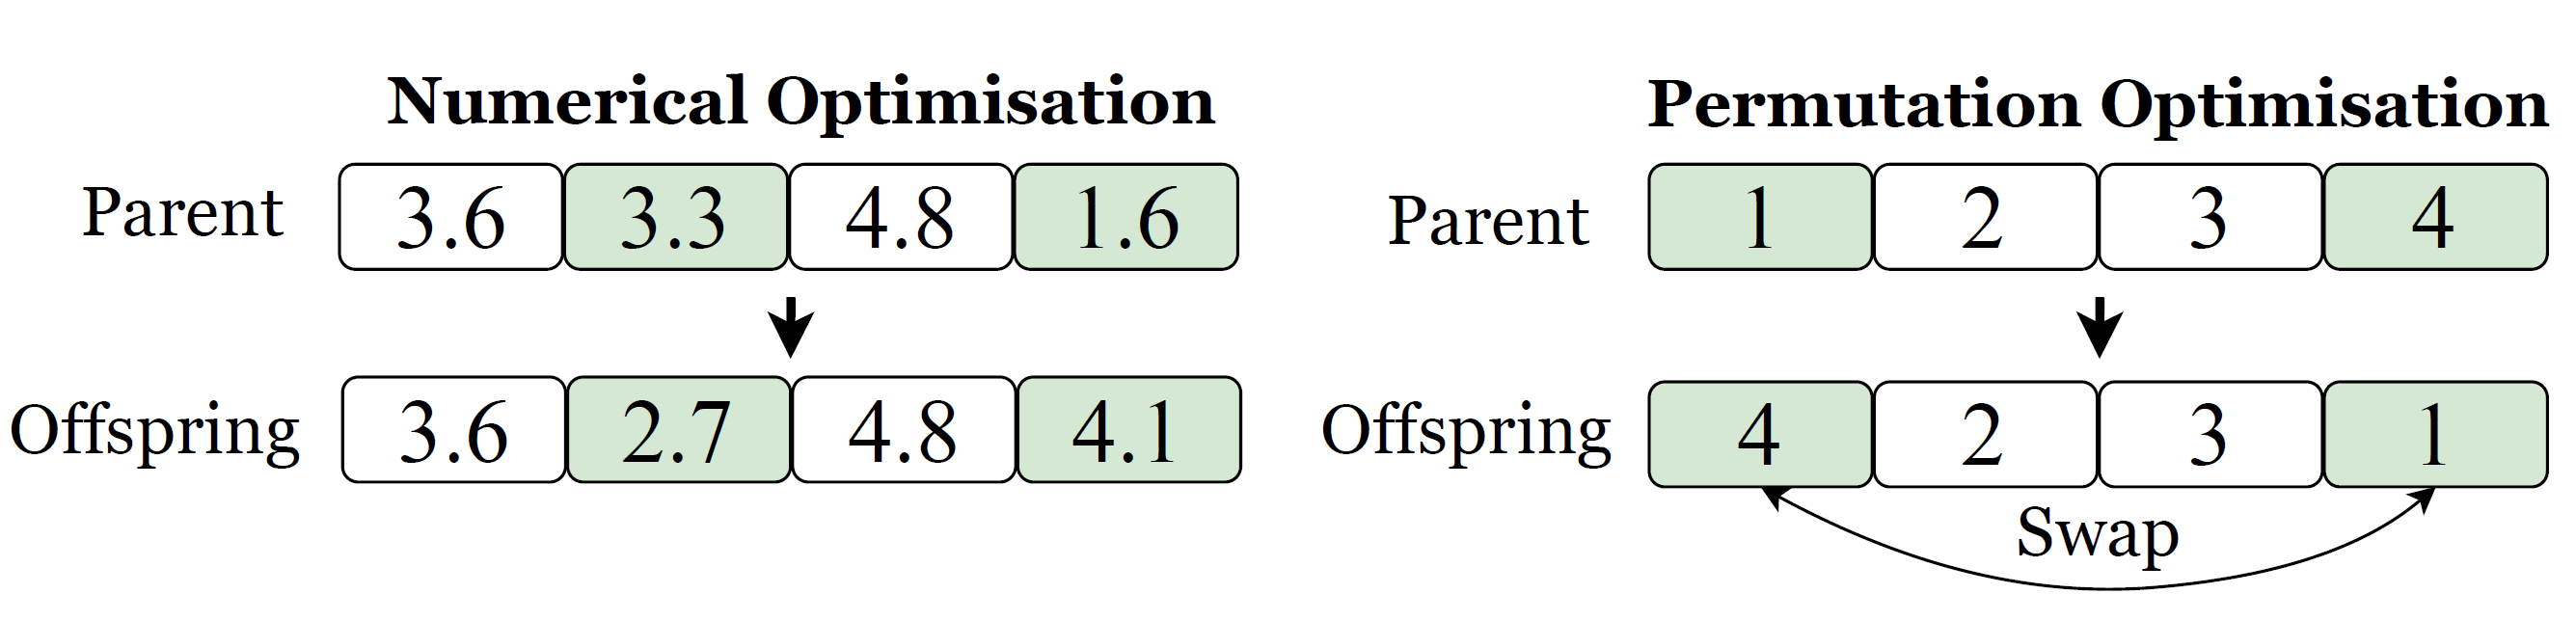 Mutation operation of 2 parents in numerical Optimisation and in permutation